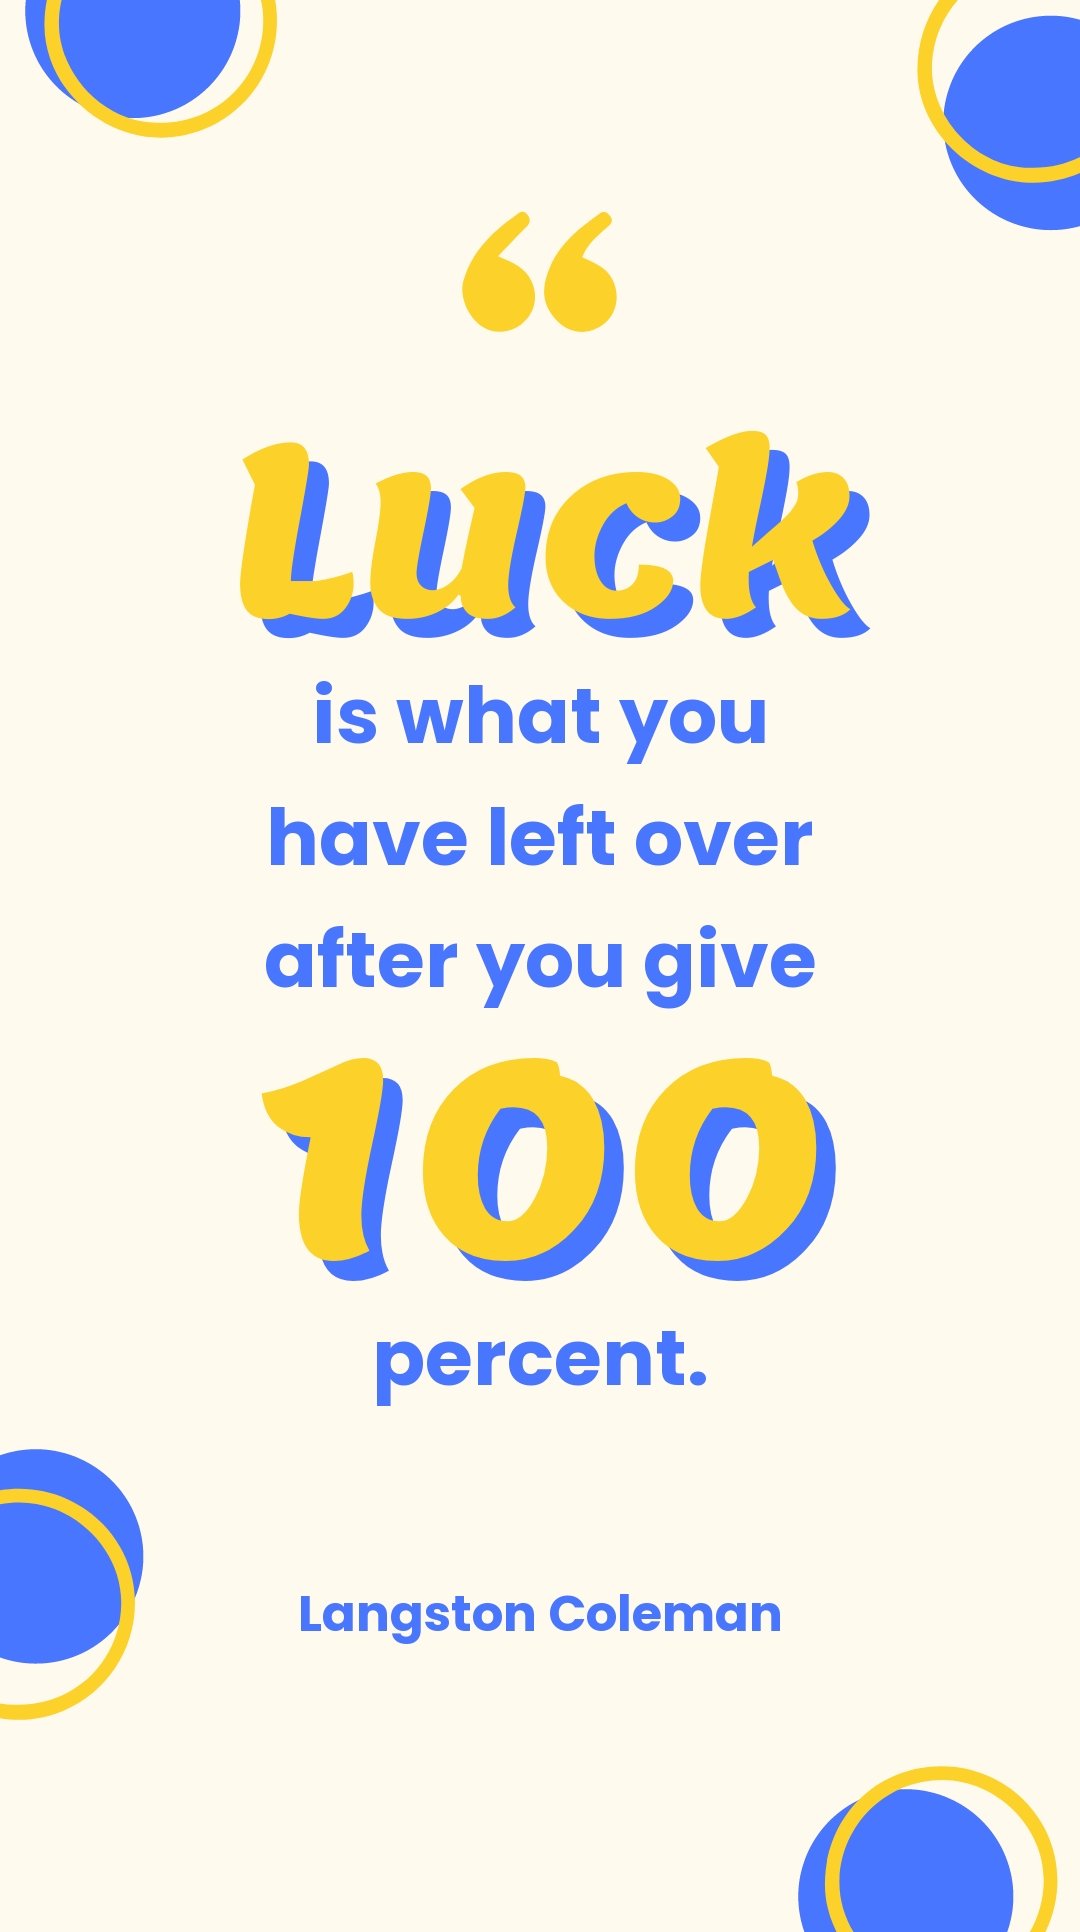 Langston Coleman - Luck is what you have left over after you give 100 percent.